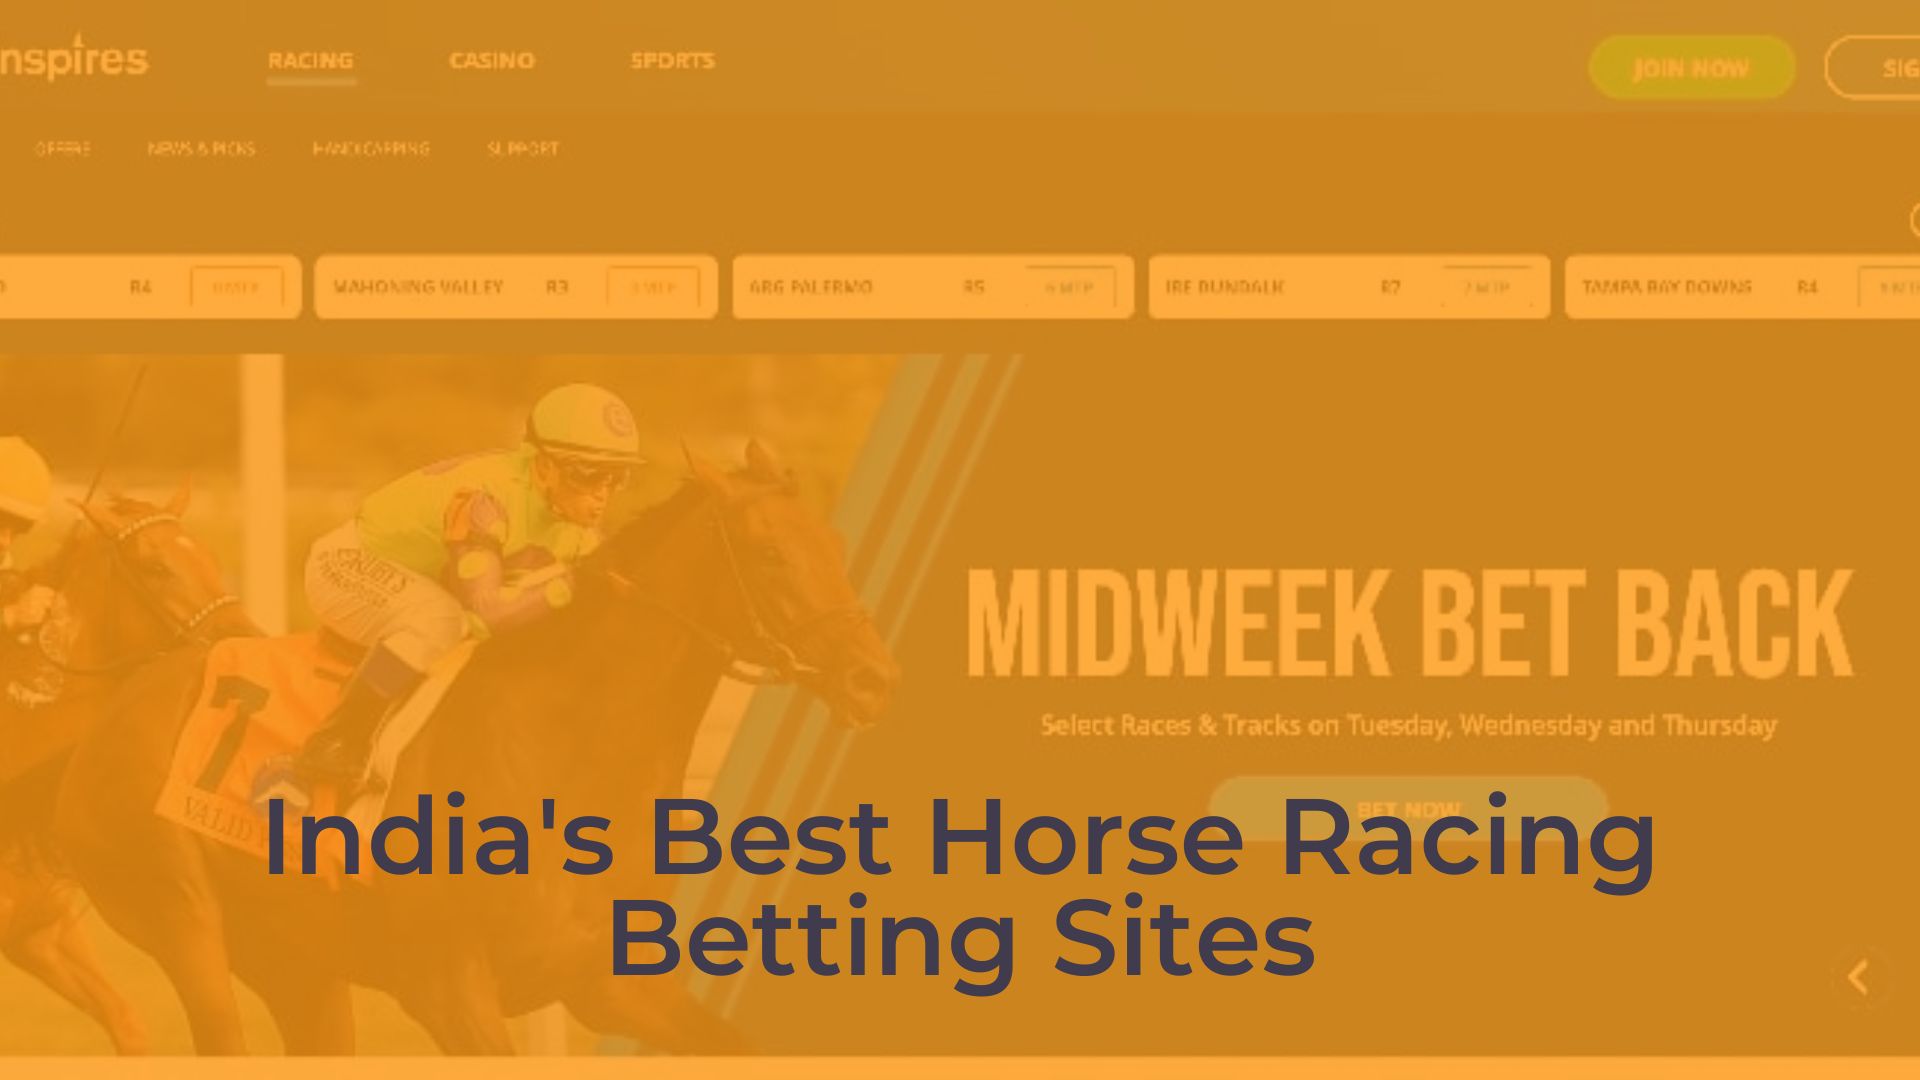 India's Best Horse Racing Betting Sites